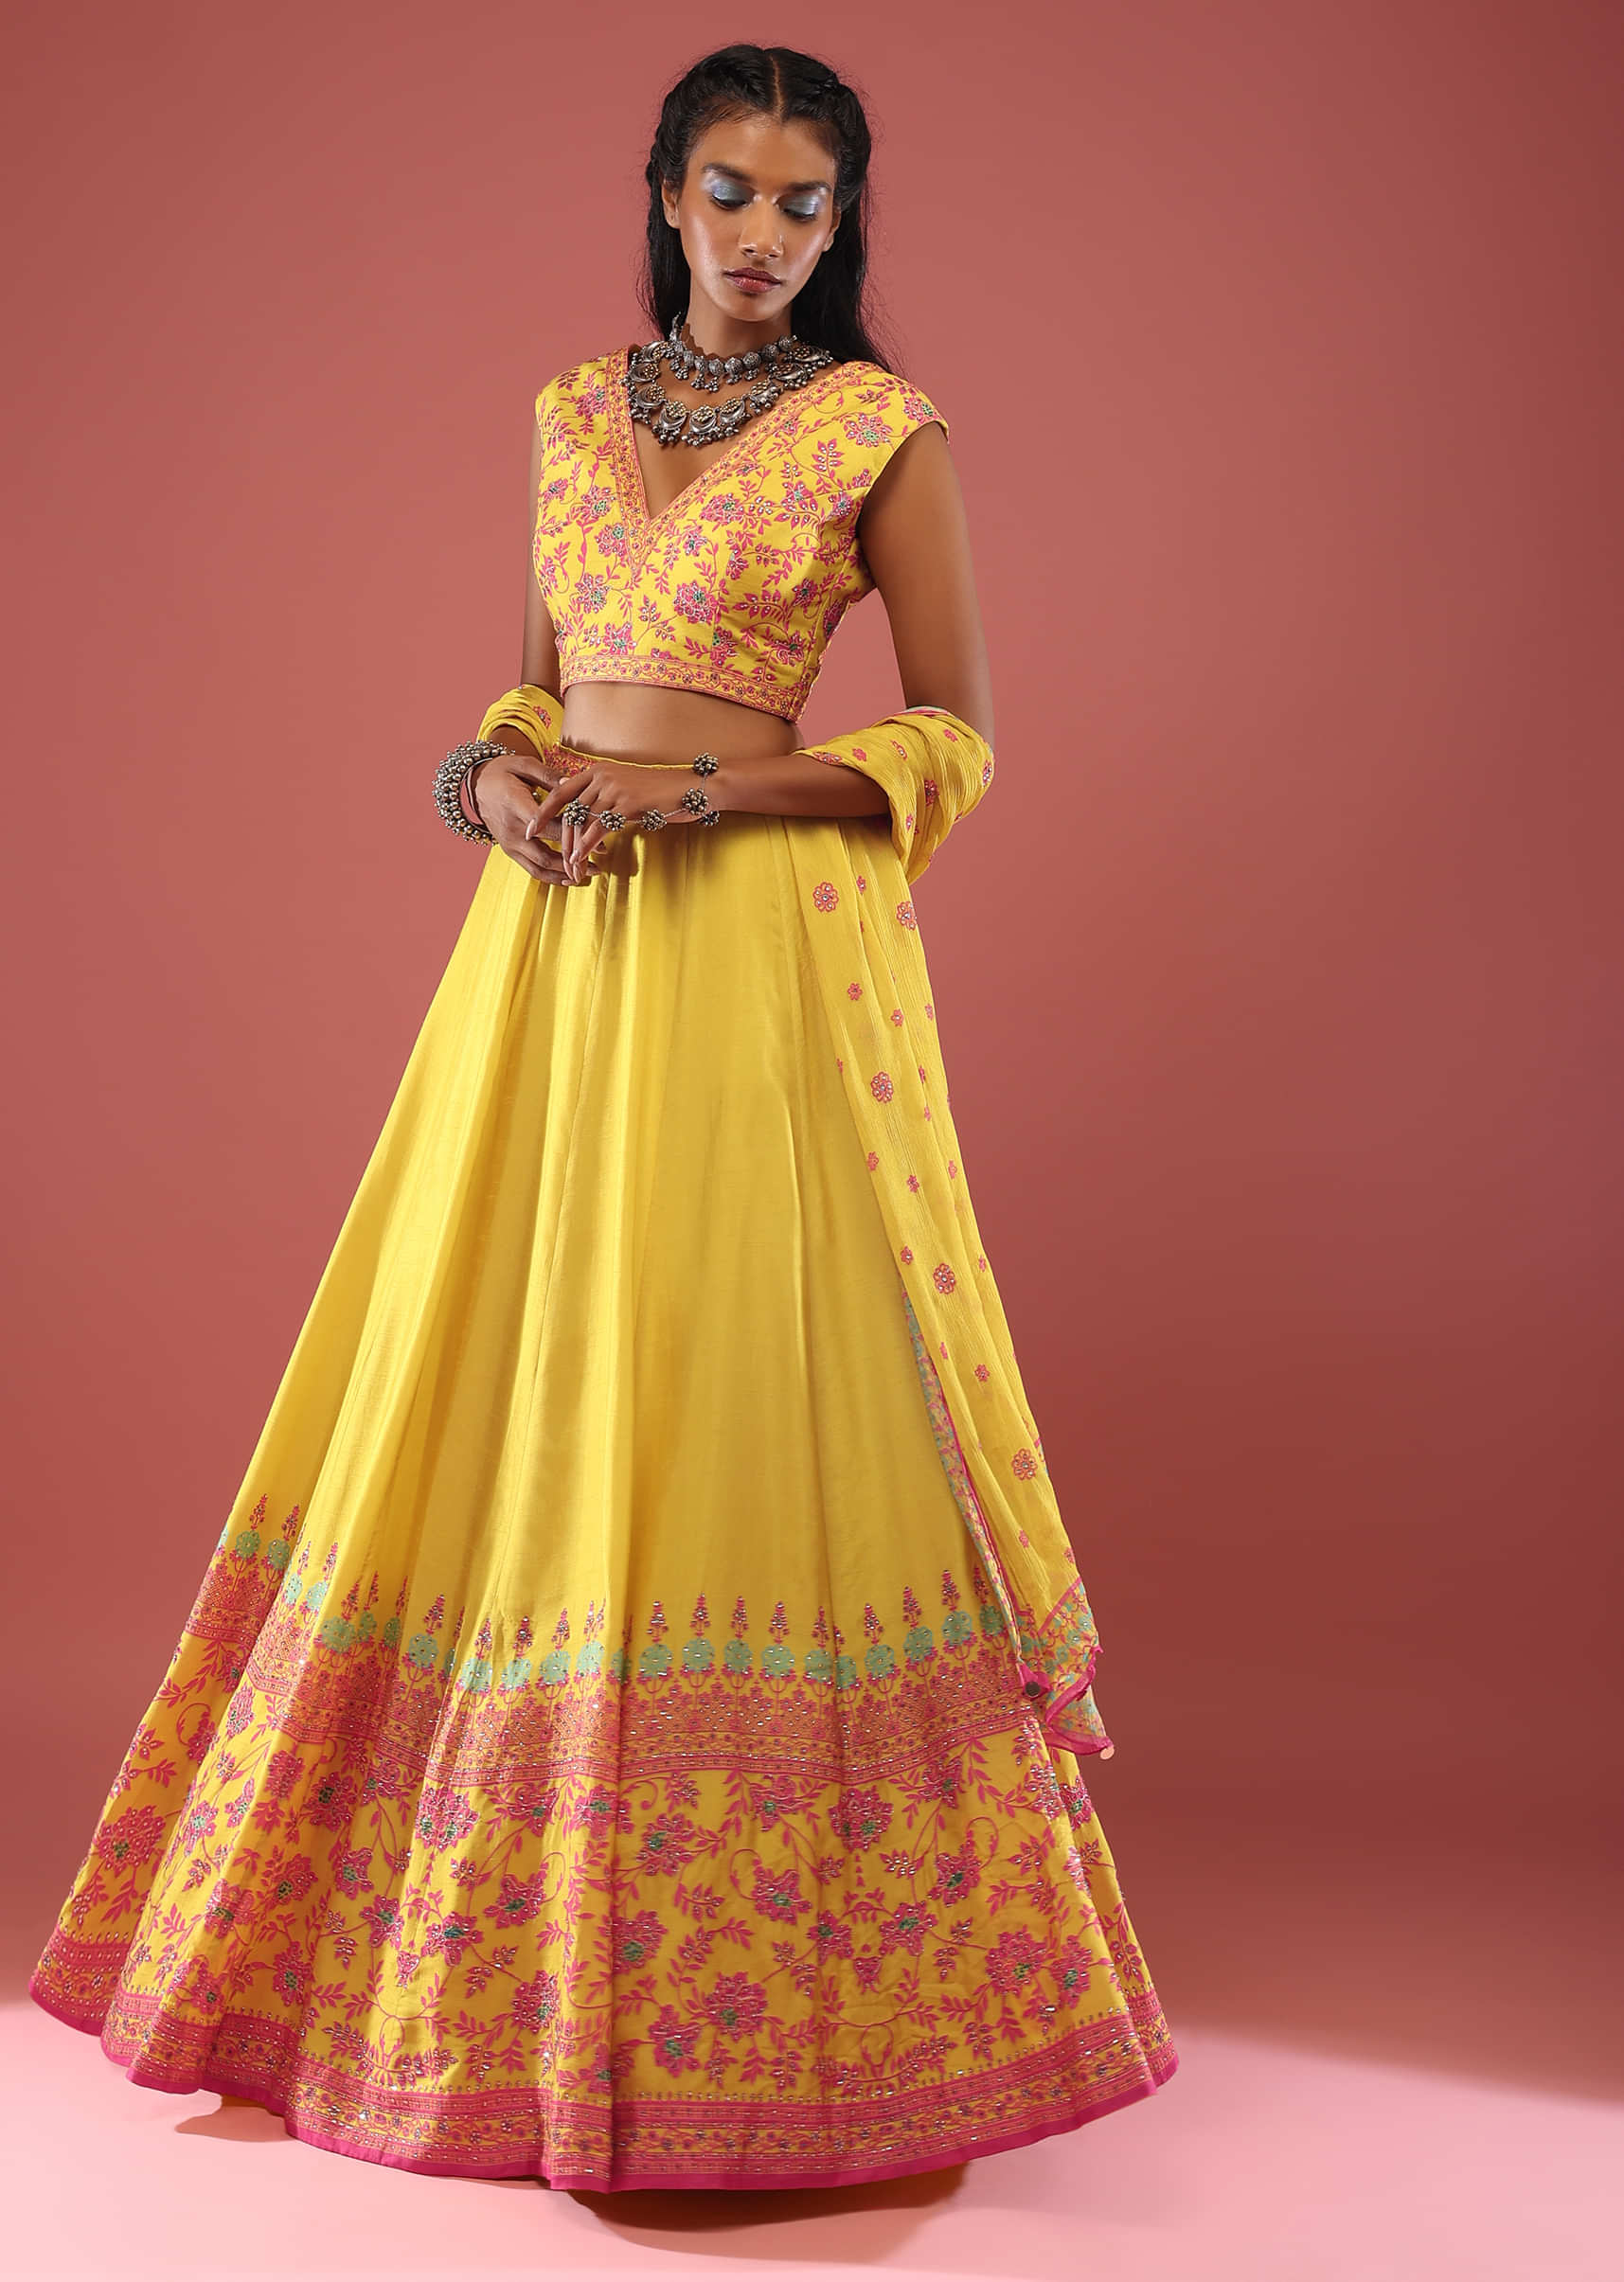 Canary Yellow Sleeveless Blouse With Colourful Stone Embellishments Paired With A Flowy Skirt